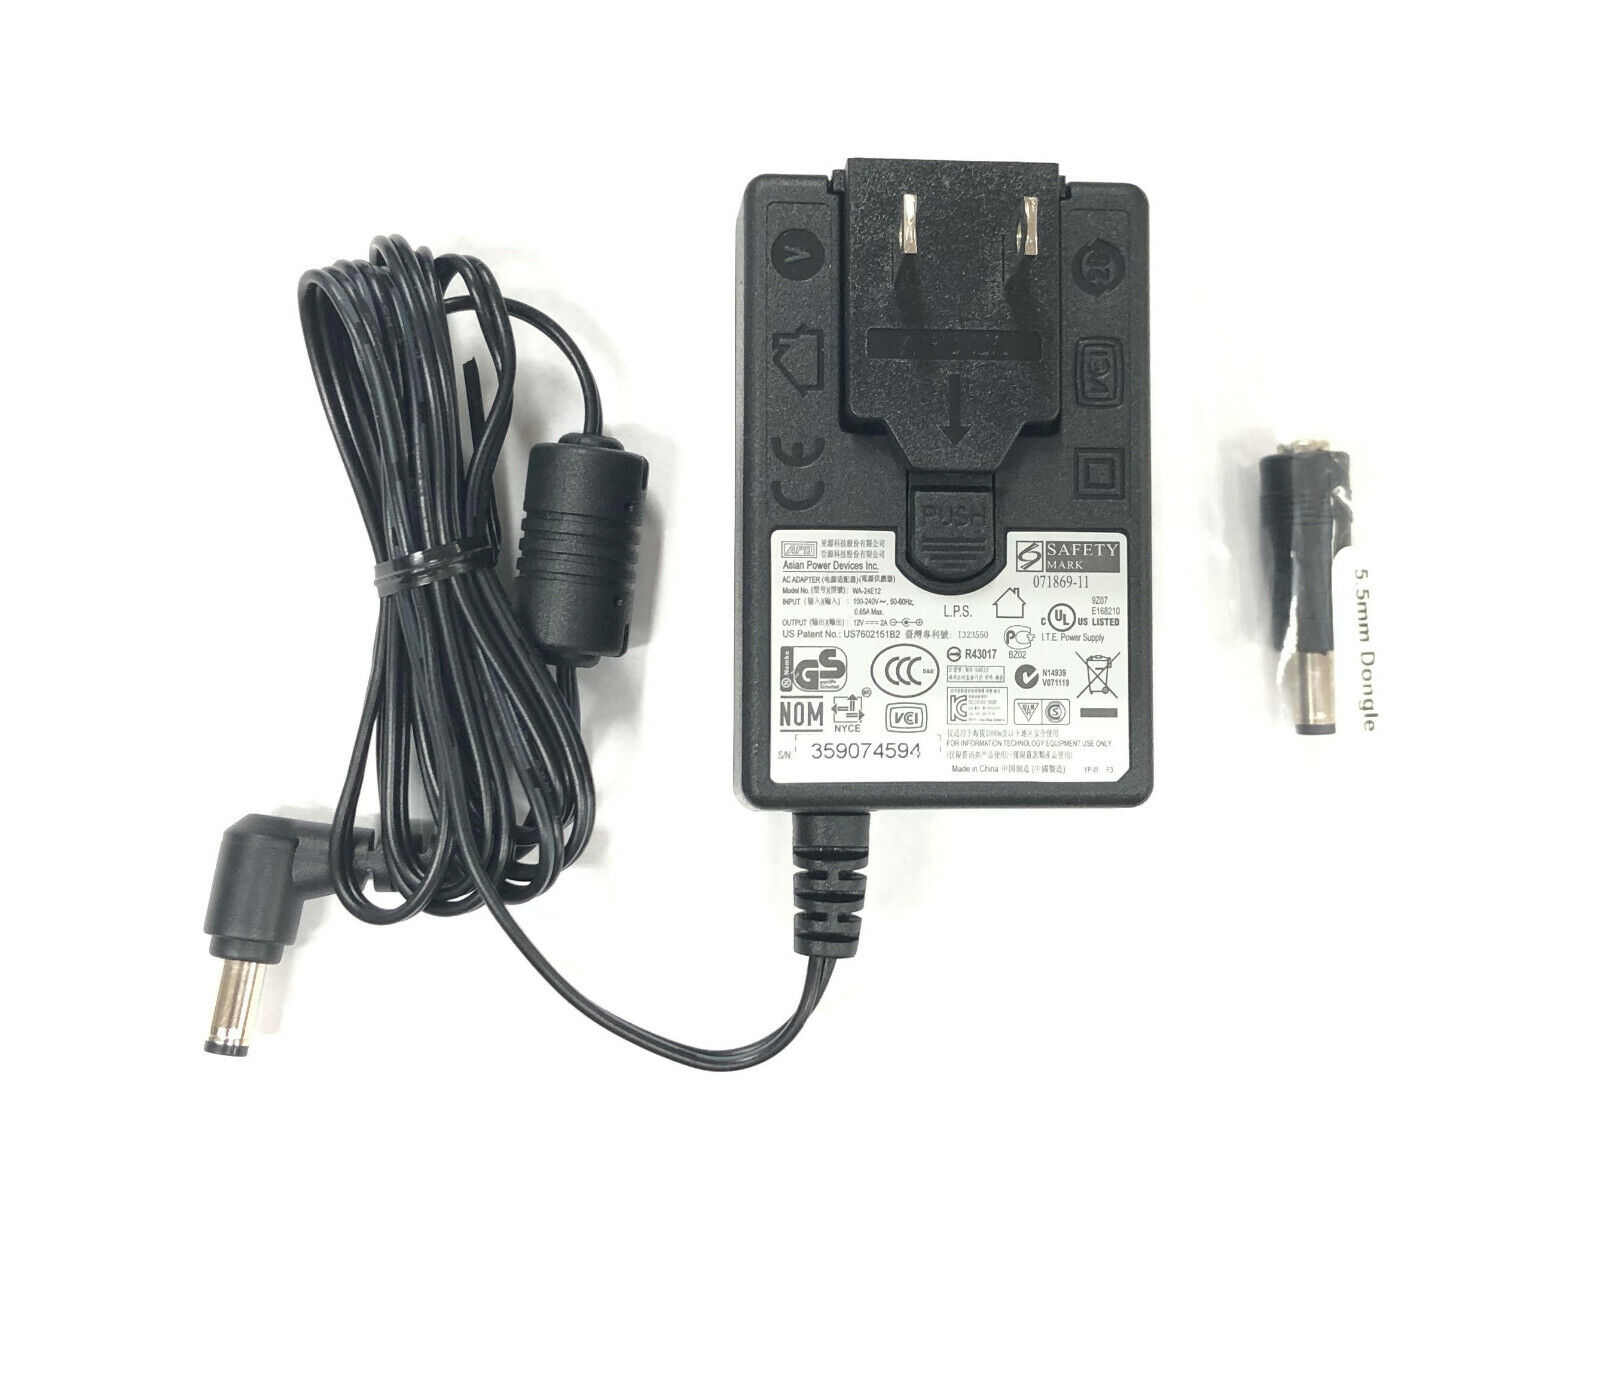 New Geniune ADP AC Adapter WA-24E12 12V For WD My Book Elite: WDBAAH0010HCH